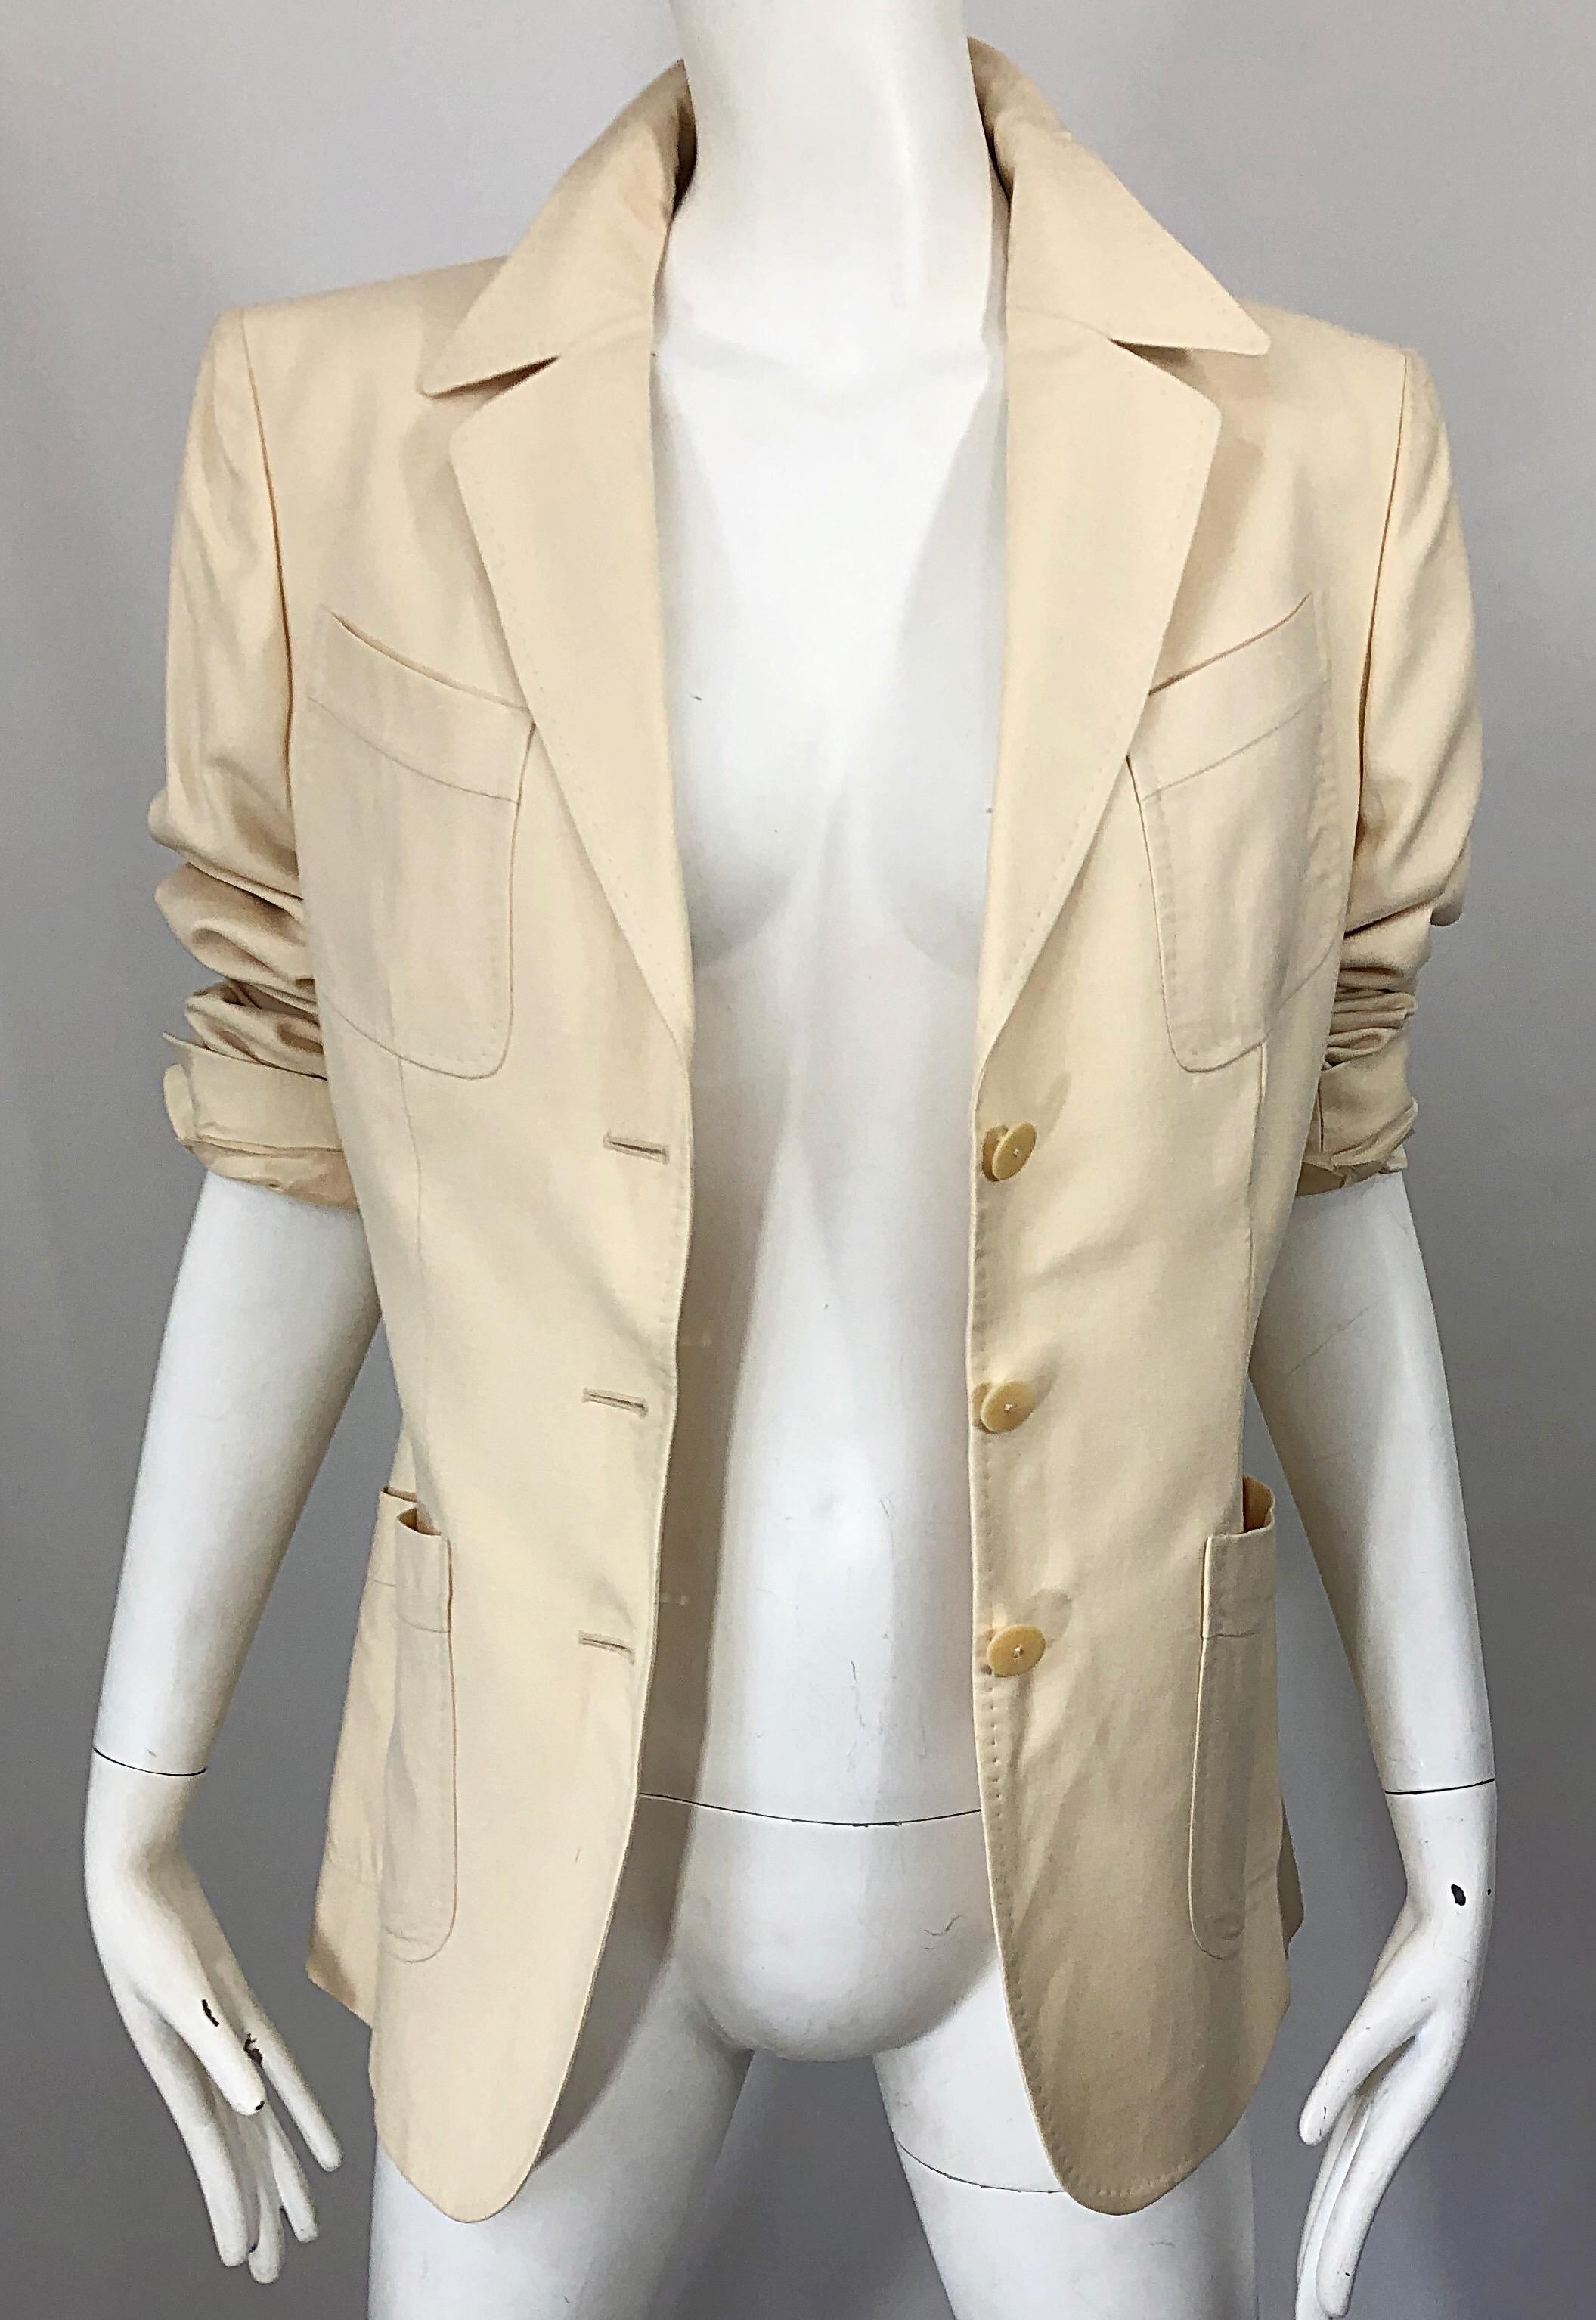 Vintage Thierry Mugler Couture 1990s Size 40 / US 8 Ivory Silk 90s Blazer Jacket For Sale 3